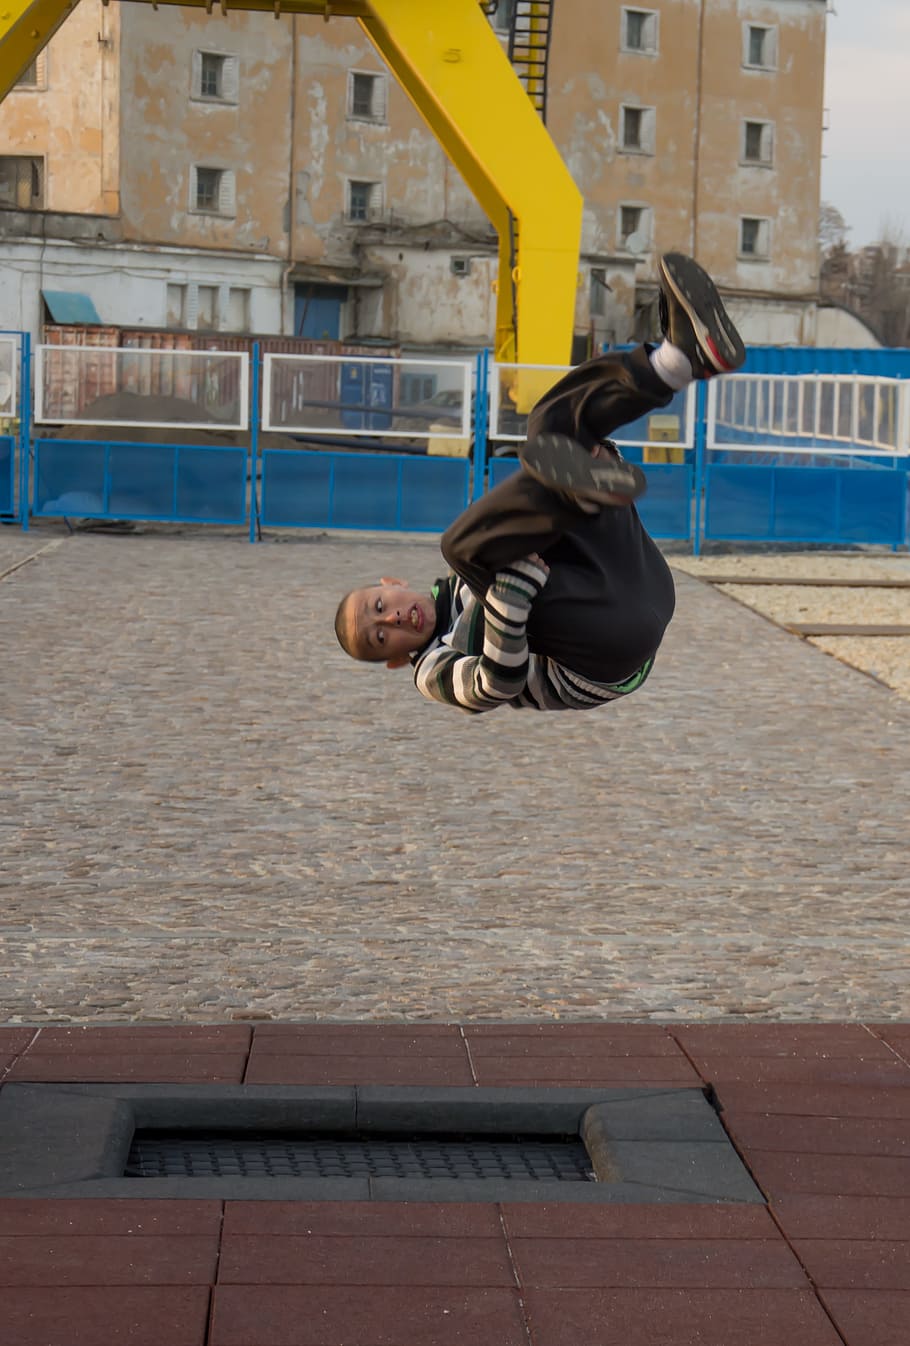 Jumps, Kids, City, Person, urban, young, sport, fitness, street, motion